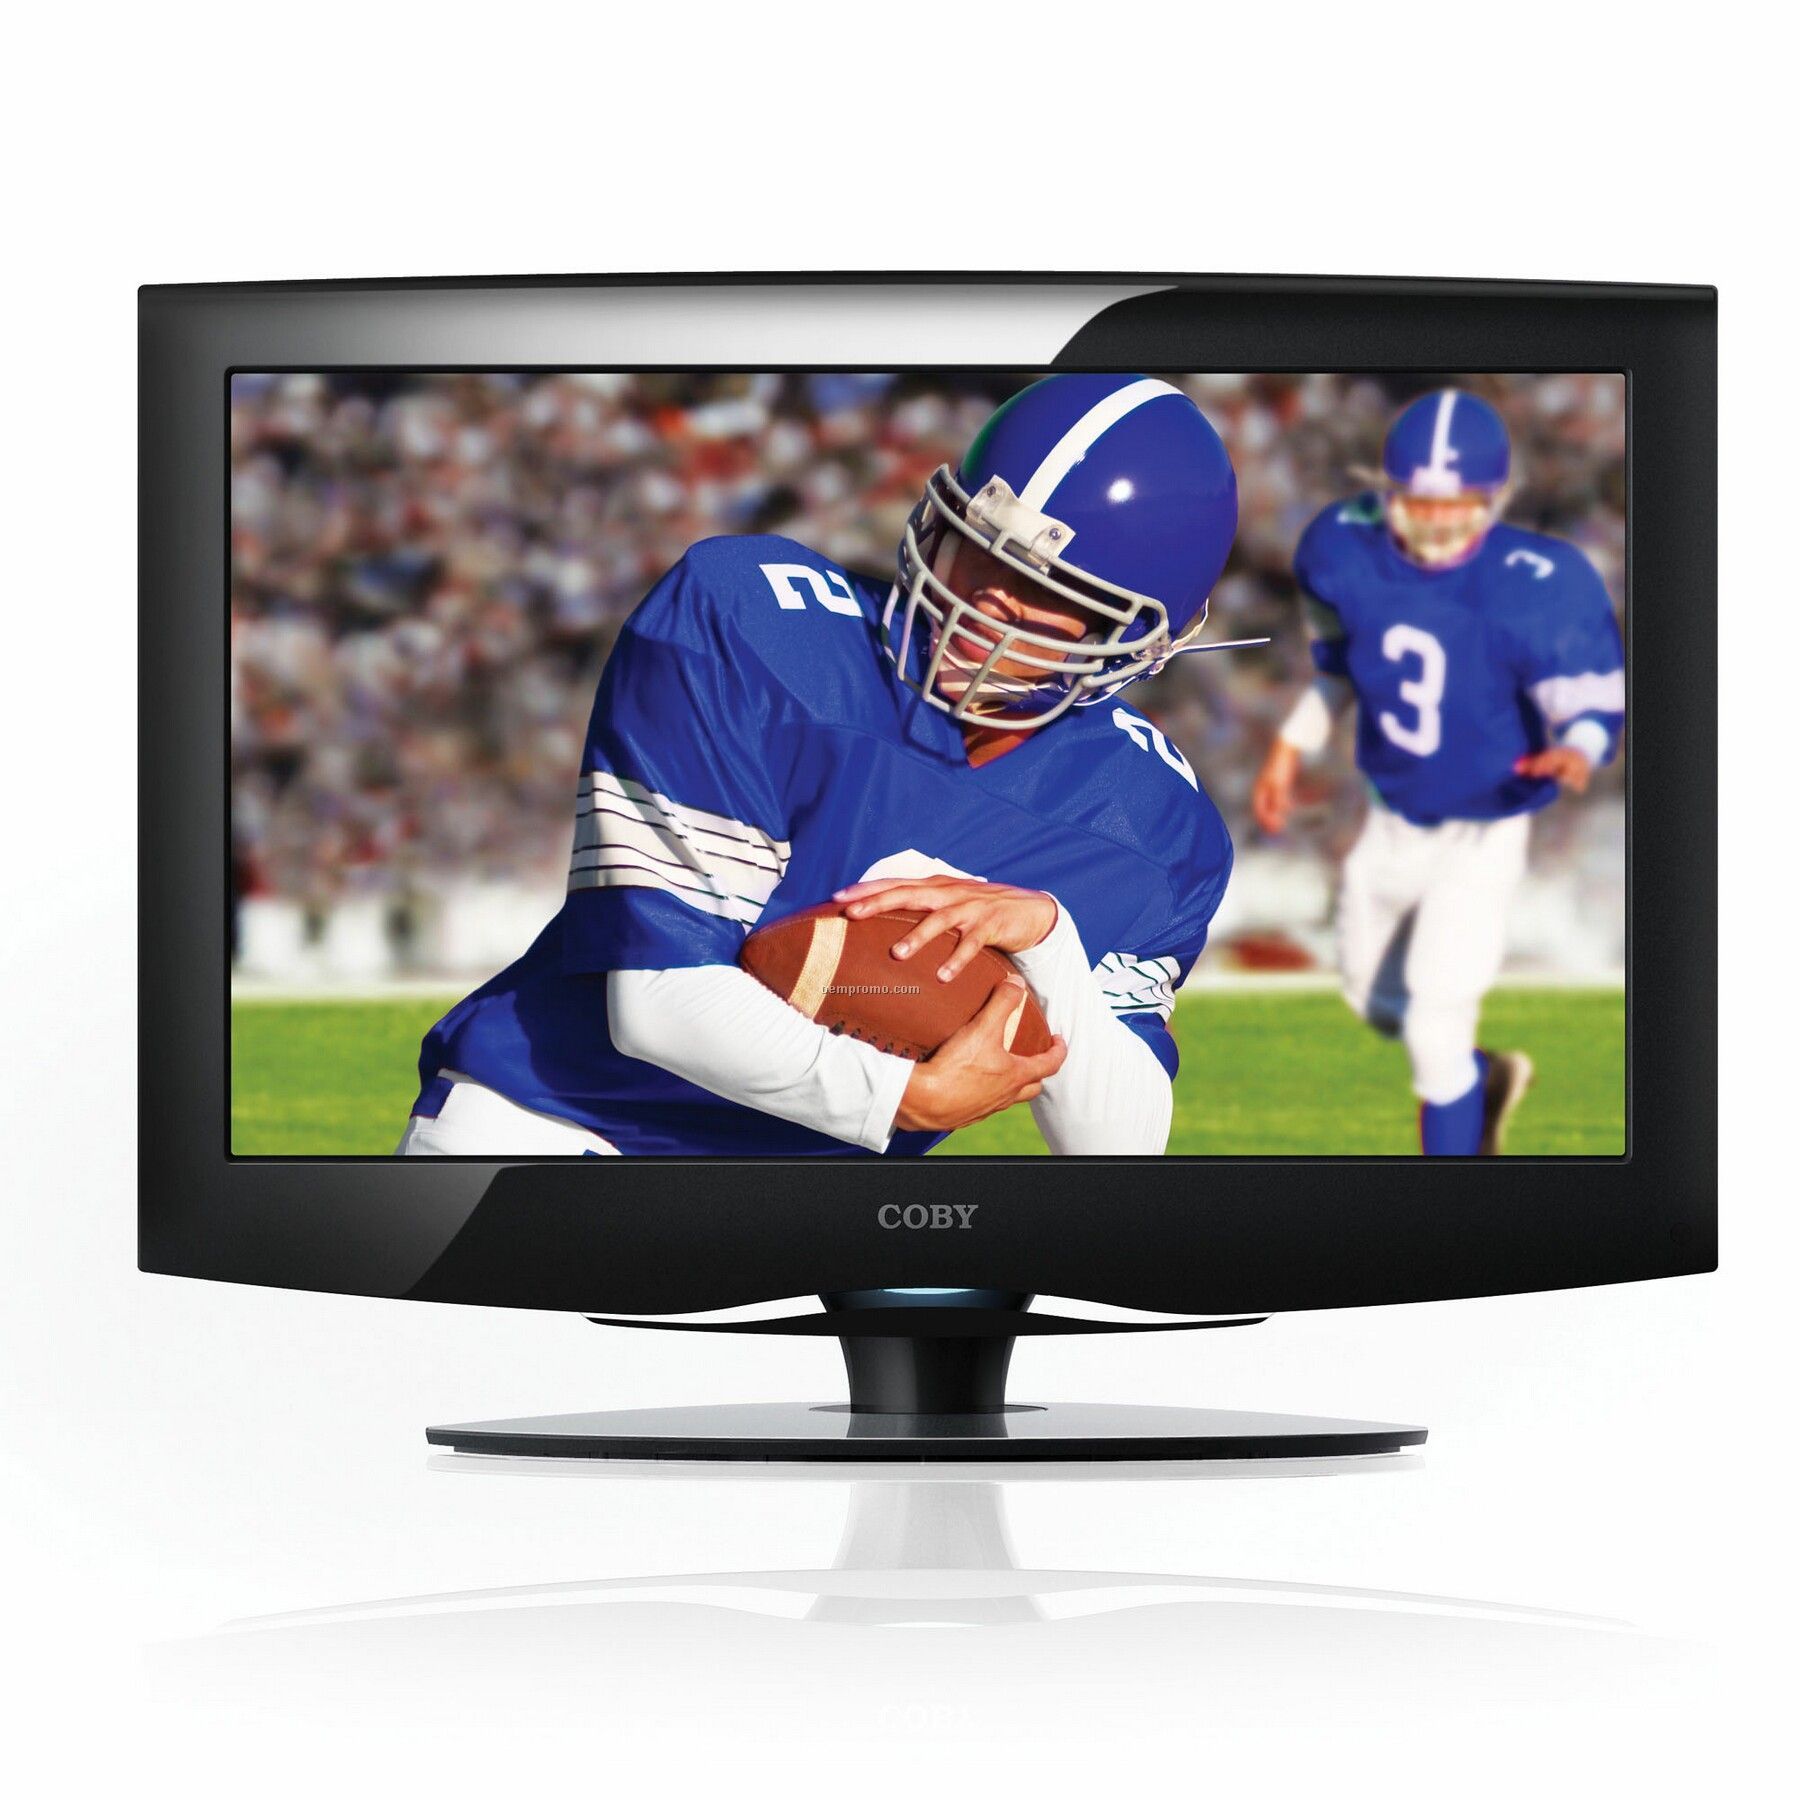 Coby 22" Widescreen Lcd Hdtv